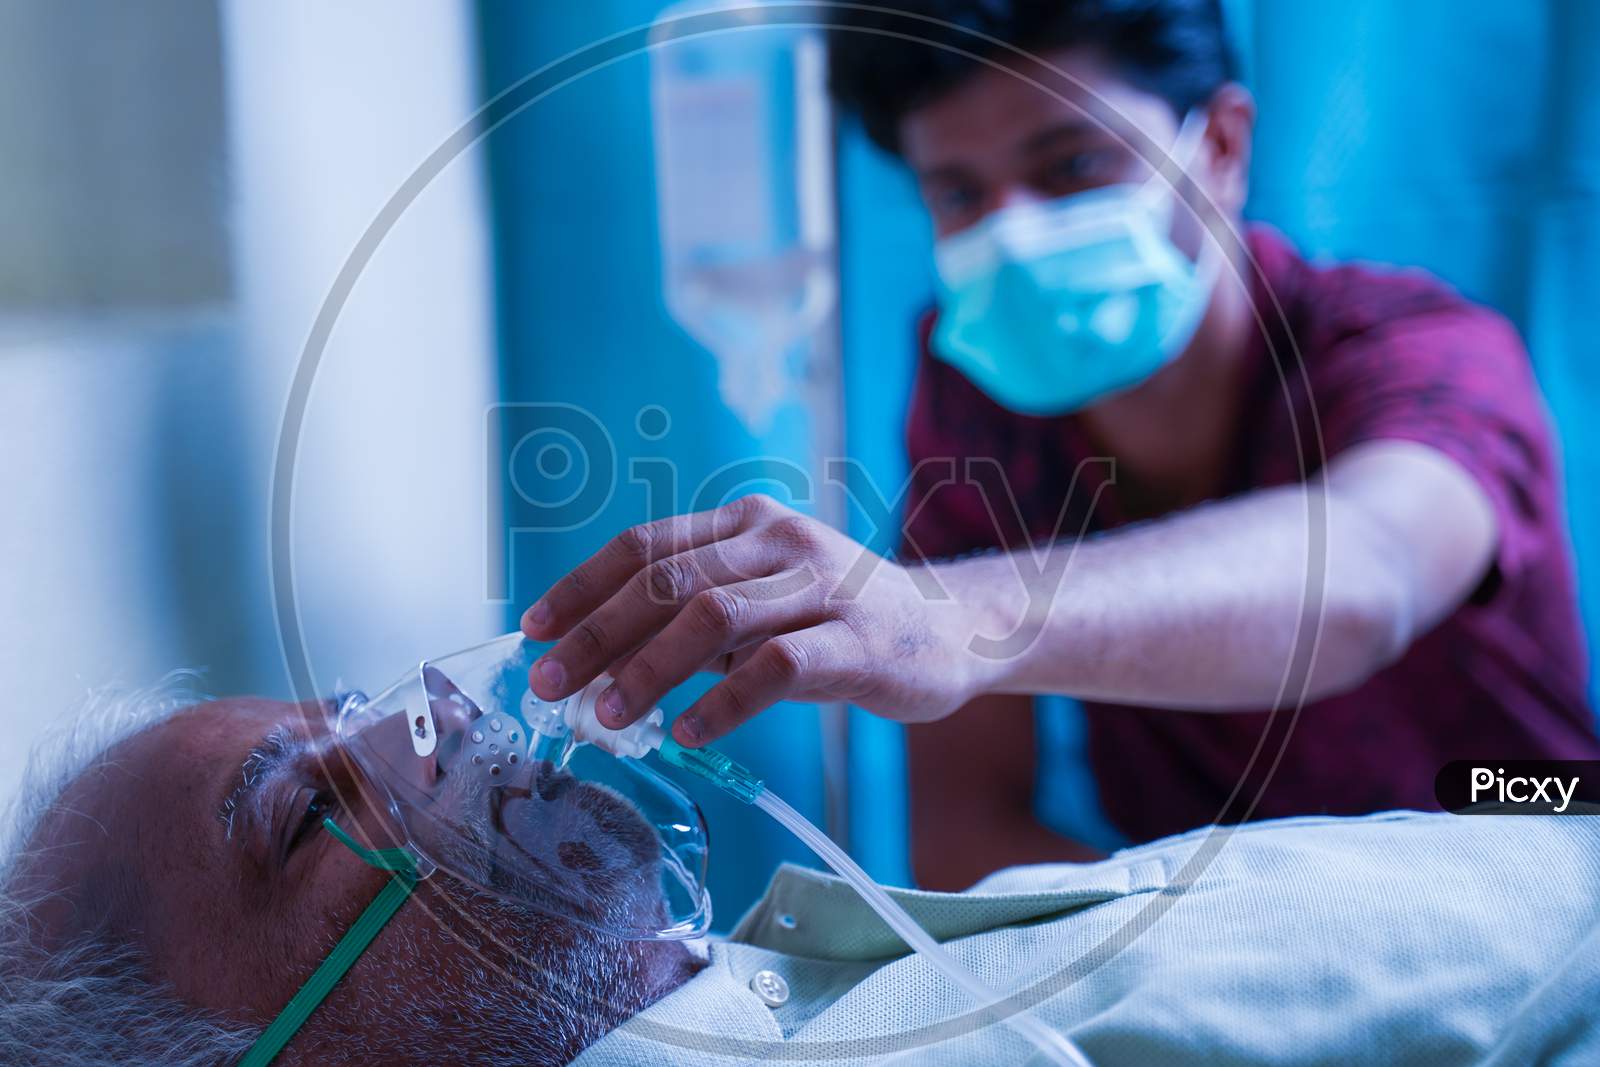 Son With Medical Face Mask Taking Care Of Sick Old Father At Hospital By Checking Ventilator Oxygen Mask - Concept Of Senior People Parental Health Care And Medical.